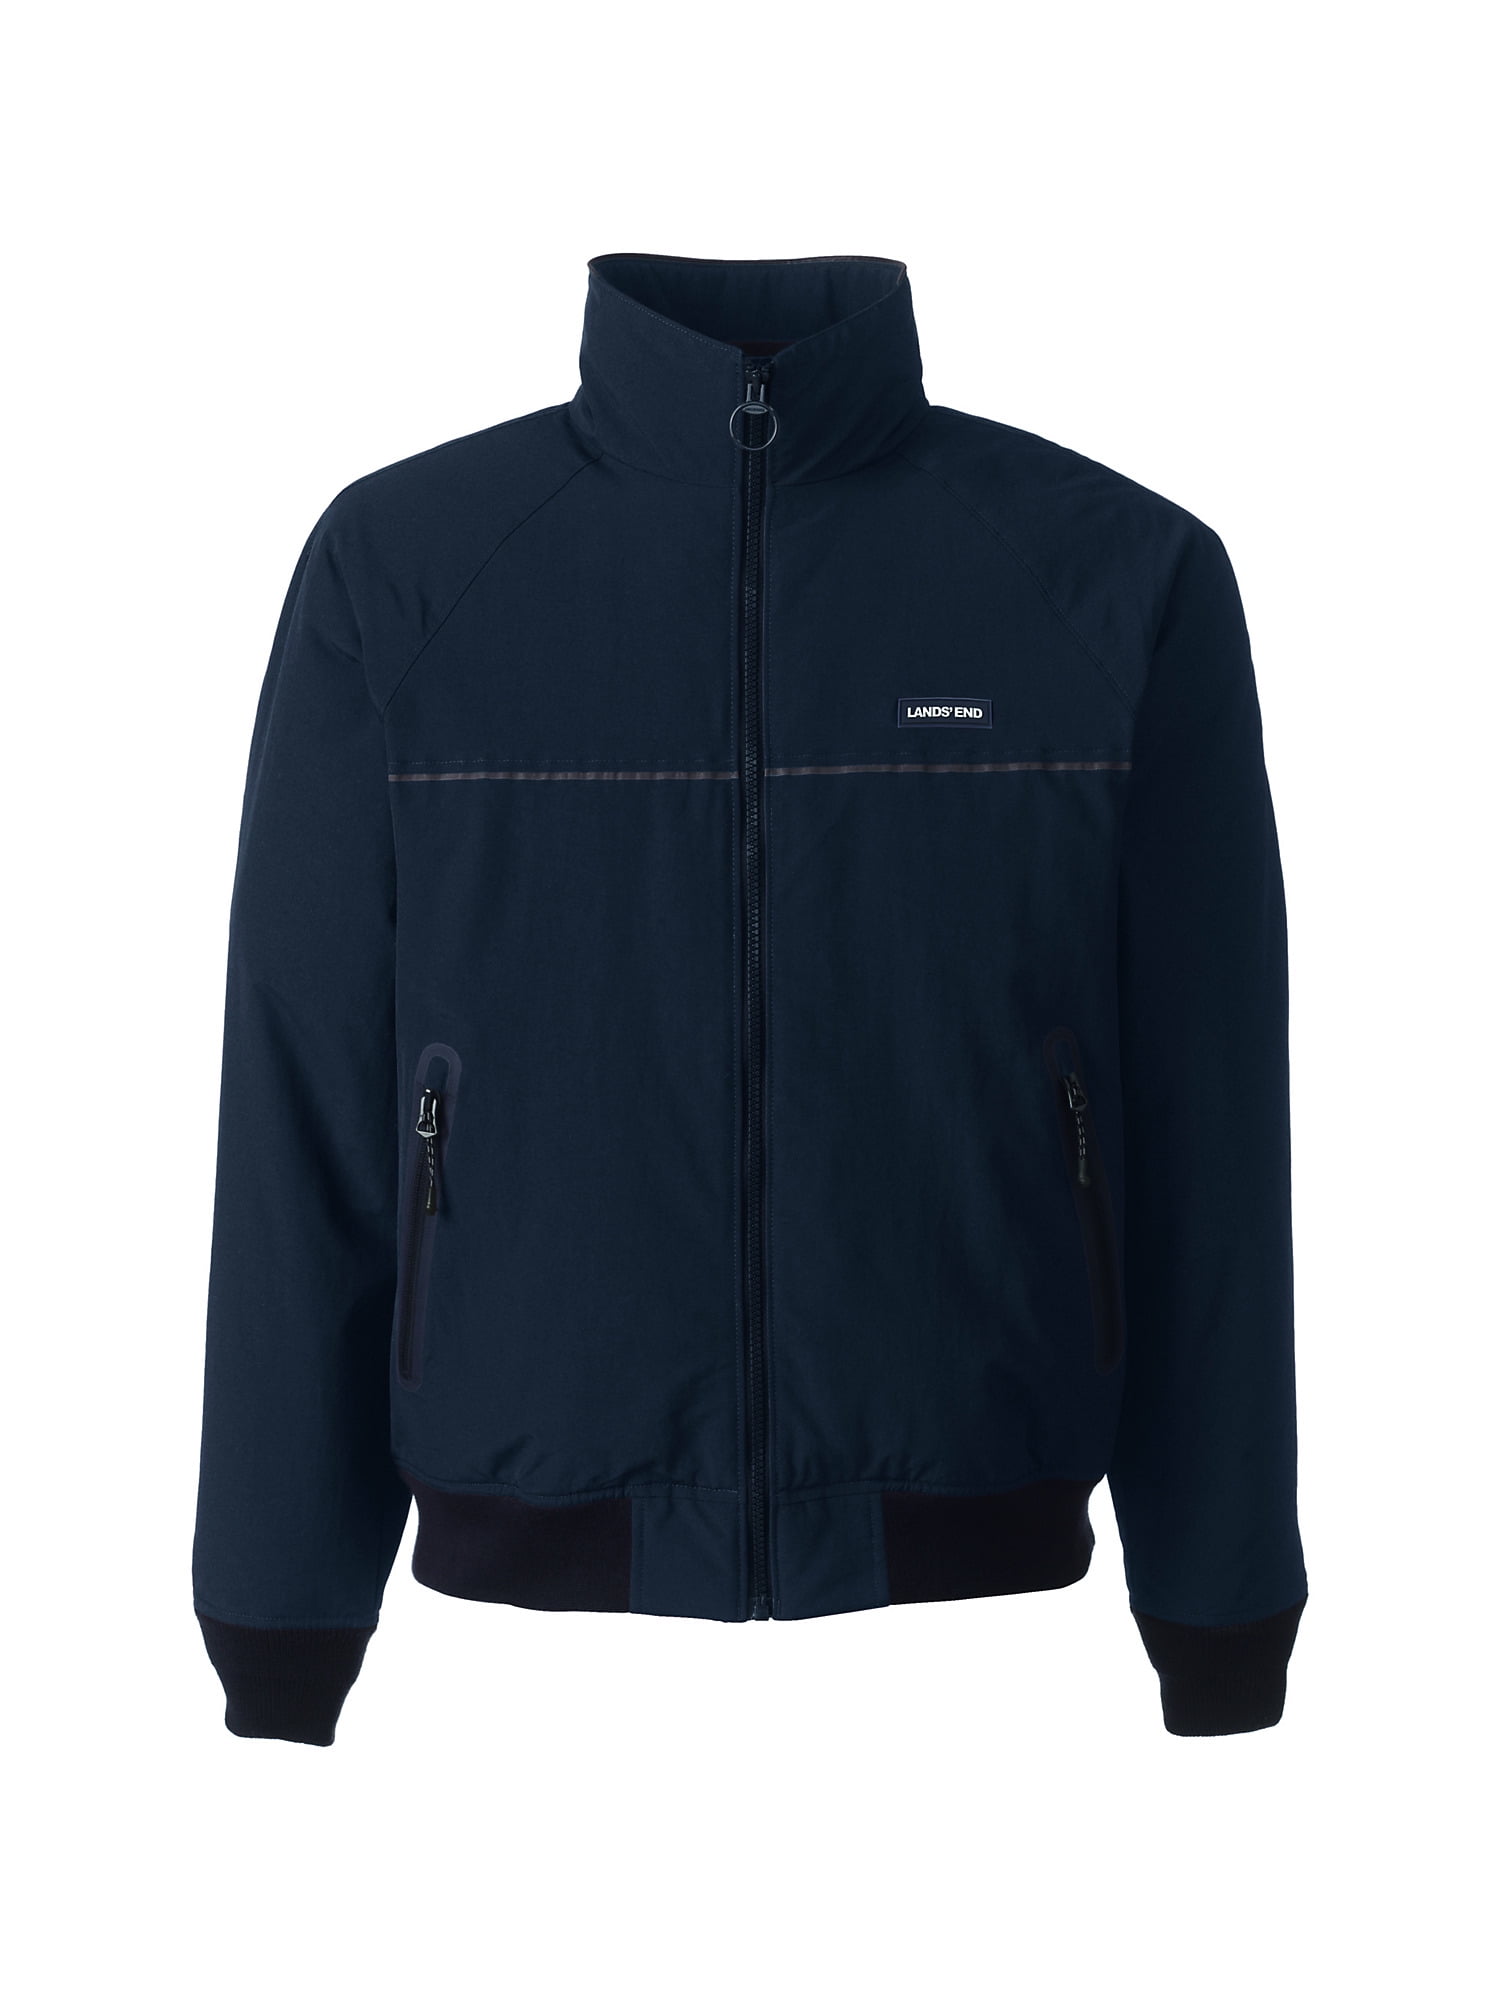 Lands' End Men's Big and Tall Classic Squall Jacket - 3X Big Tall ...